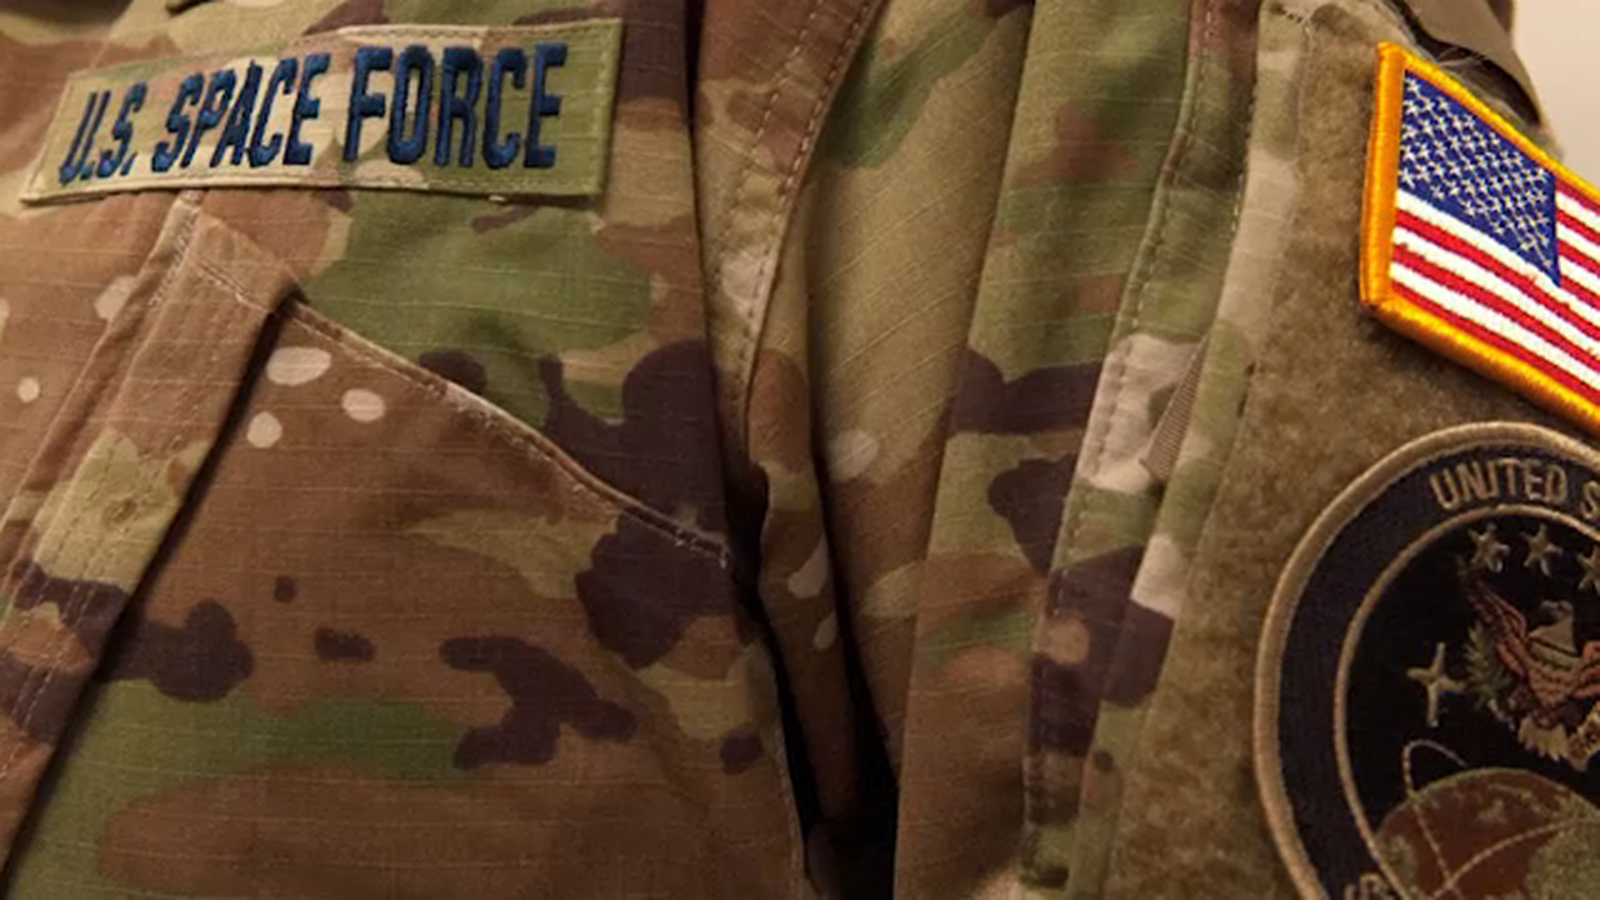 United States Space Force unveils camouflage uniforms